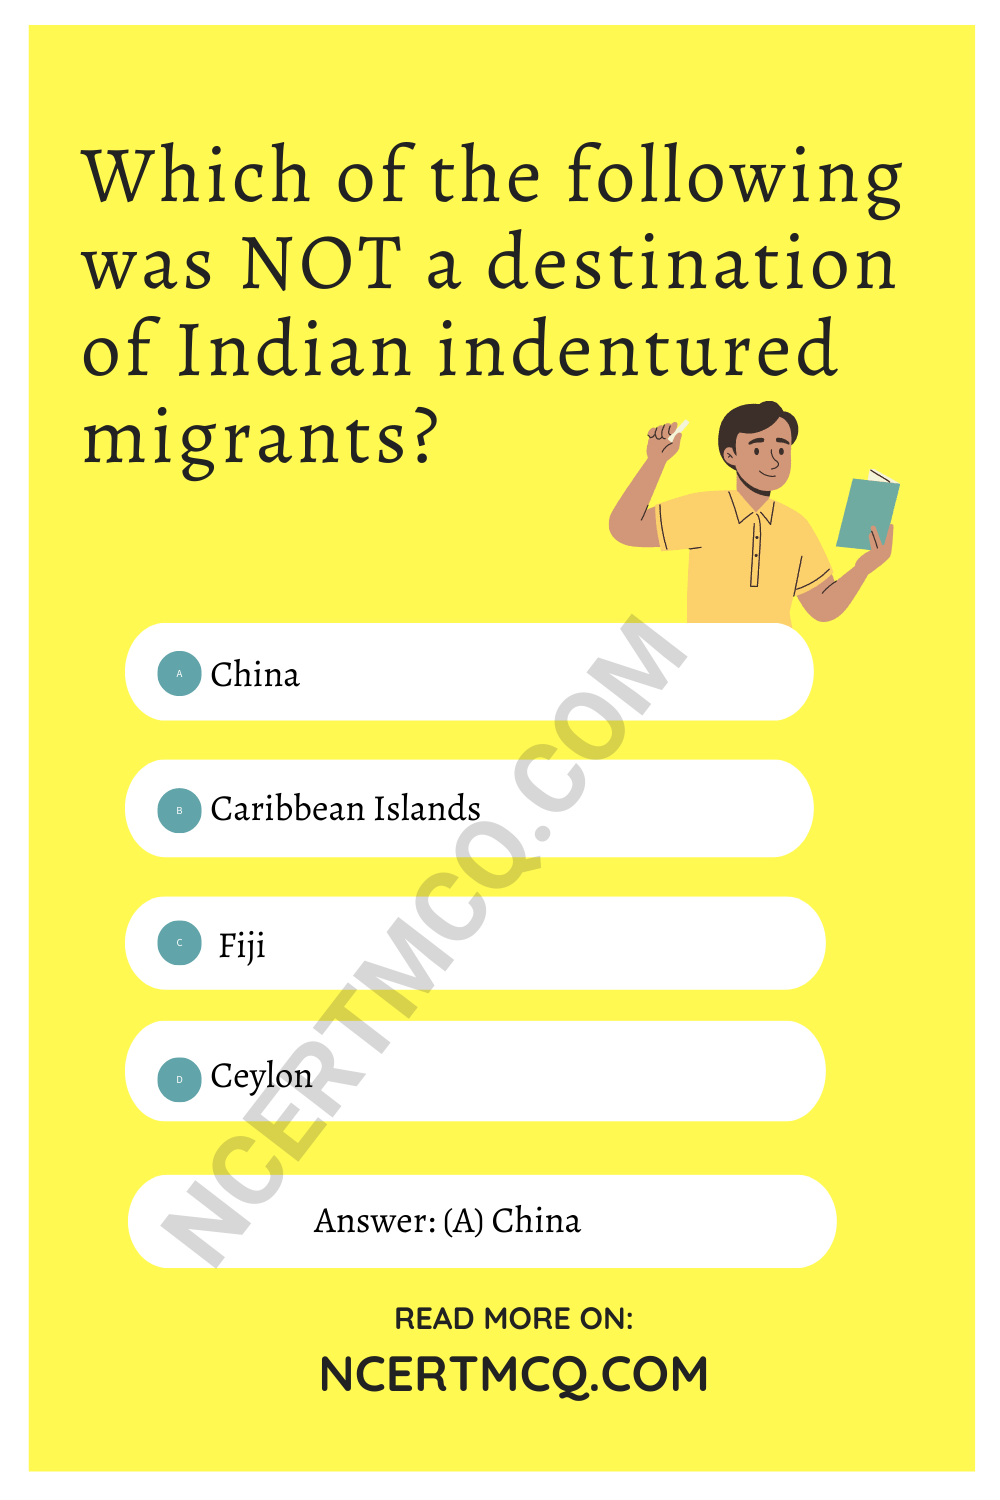 Which of the following was NOT a destination of Indian indentured migrants?